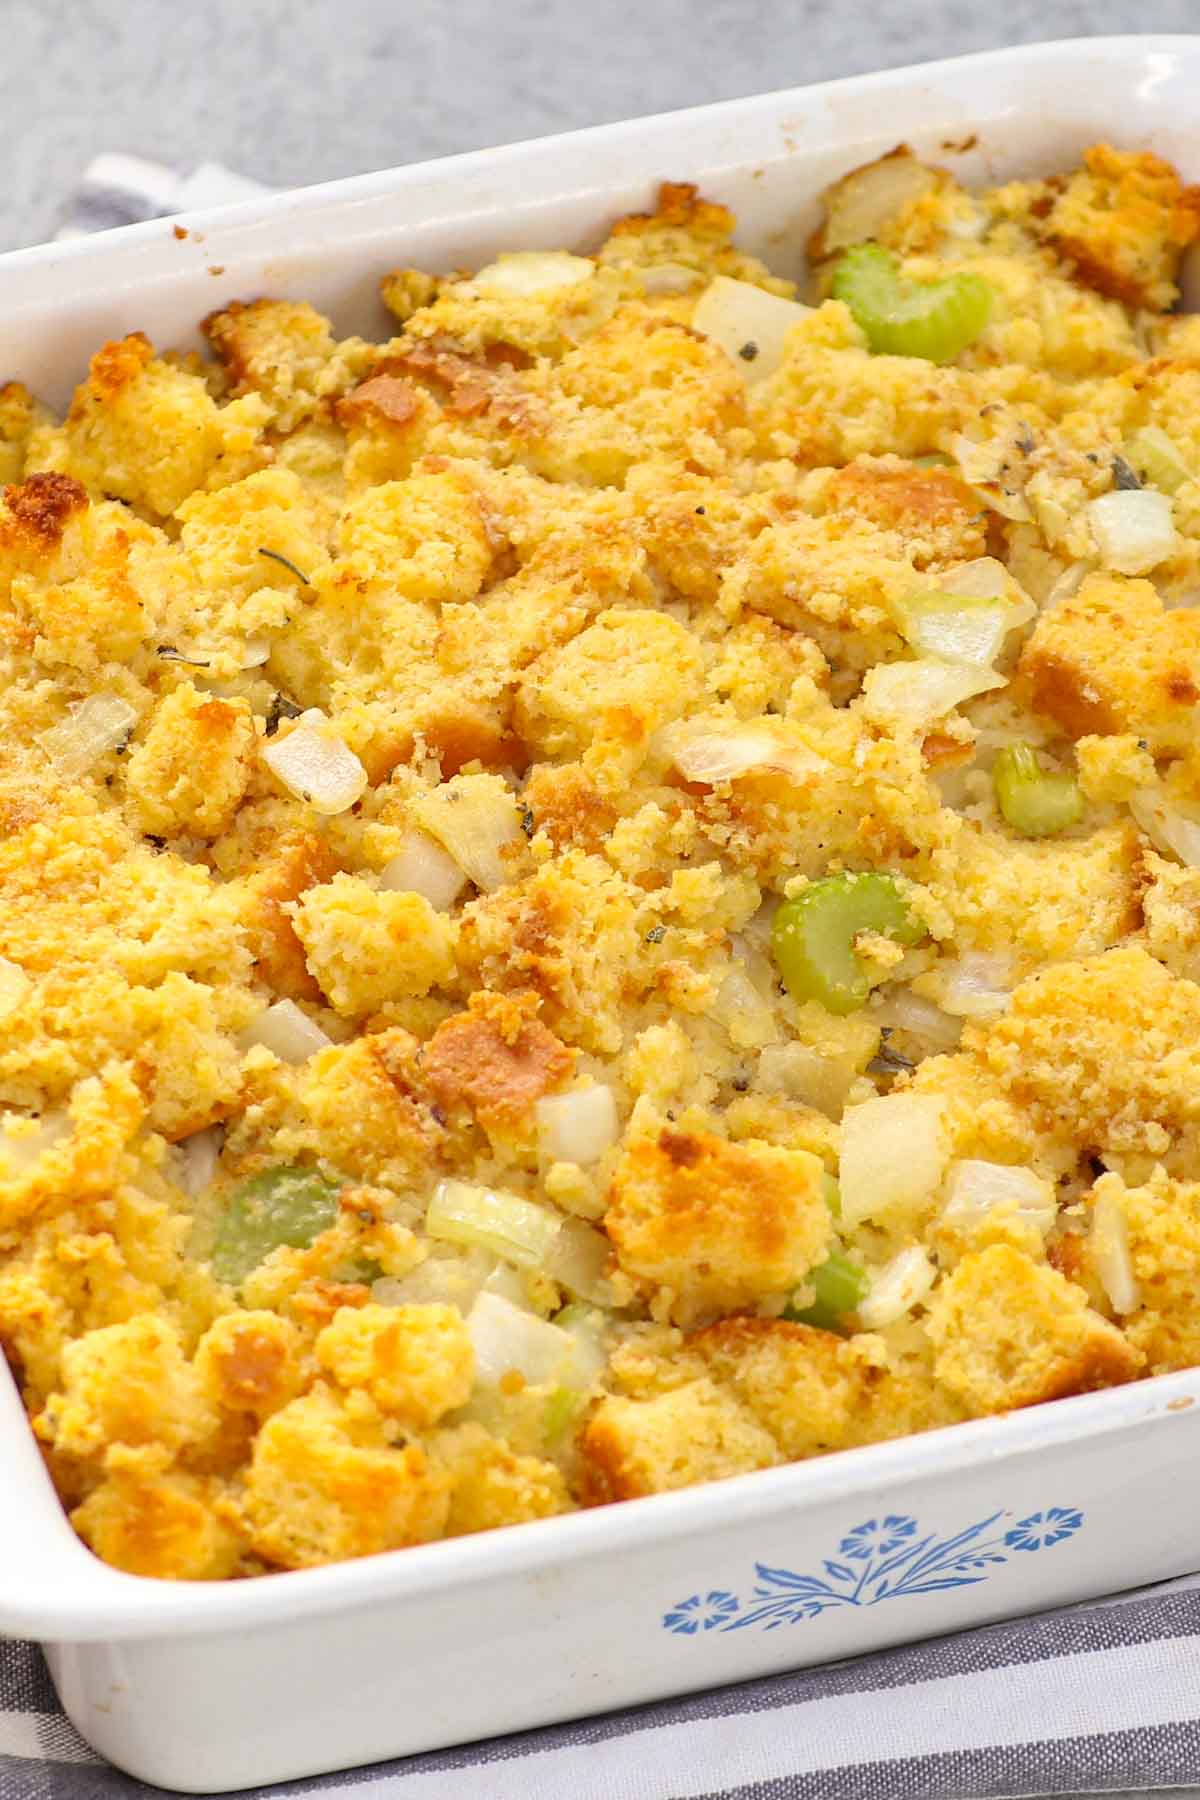 If you’re looking for a comforting, old-fashioned Southern dish, look no further than Cornbread Dressing. This Paula Deen cornbread stuffing is the perfect holiday side dish for your Thanksgiving or Christmas dinner menu. Enjoy it with your favorite proteins and a smothering of cranberry sauce for a supremely festive dish.